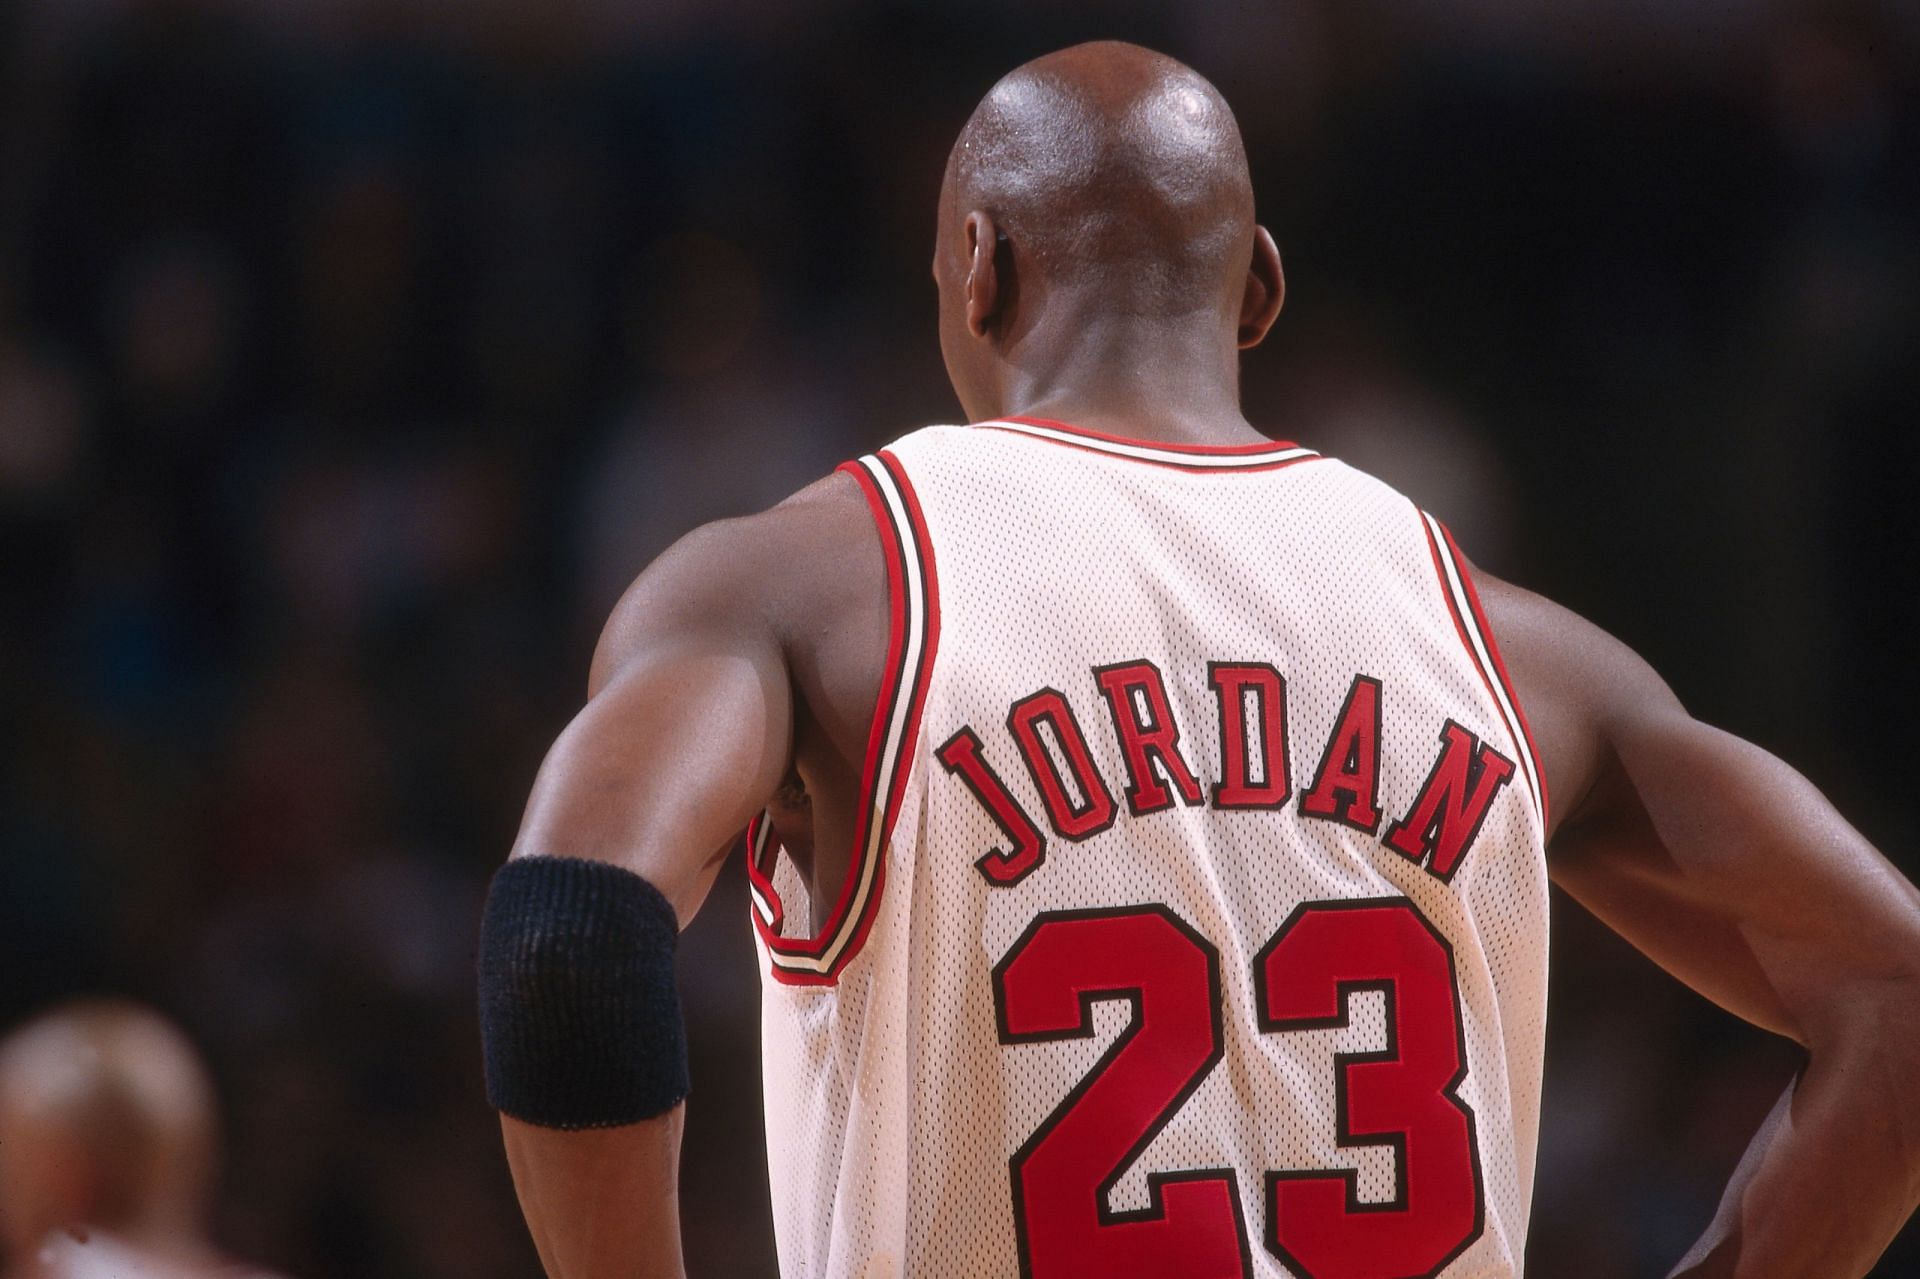 The Man Who Was “Better” Than Michael Jordan: The Incredible Rise